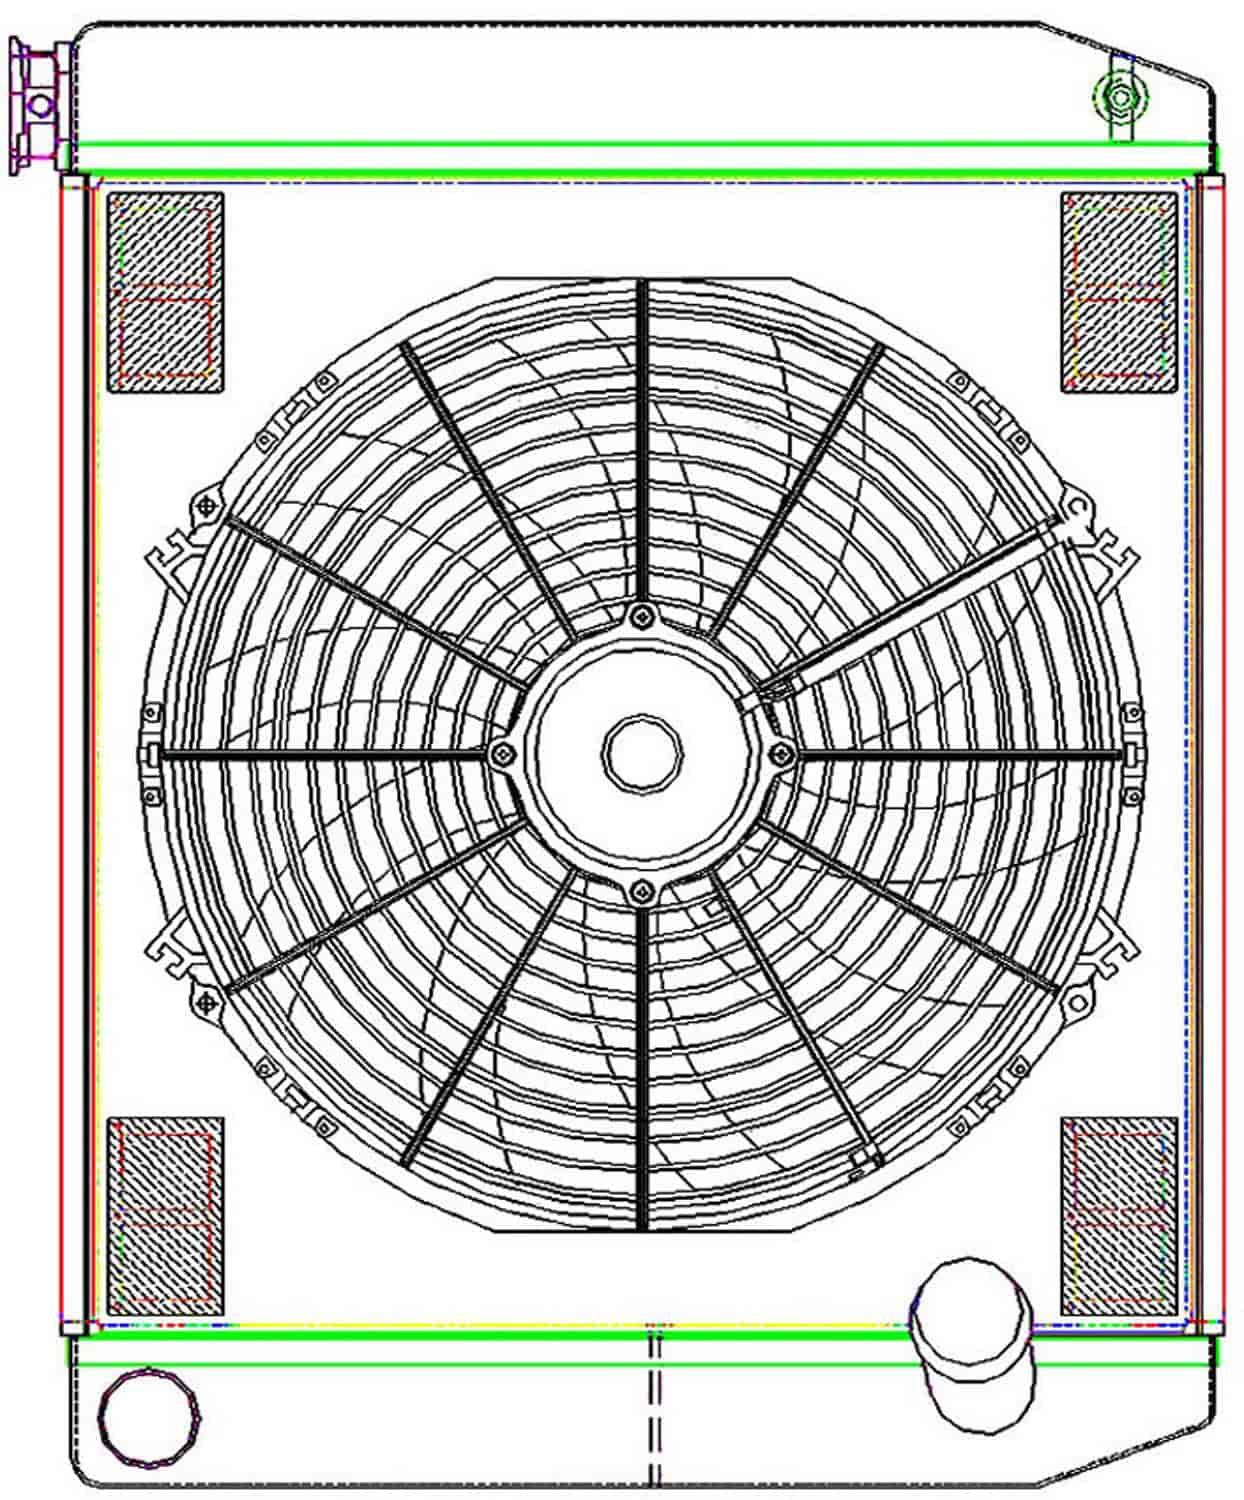 MegaCool ComboUnit Universal Fit Radiator and Fan Dual Pass Crossflow Design 24" x 19" with No Options